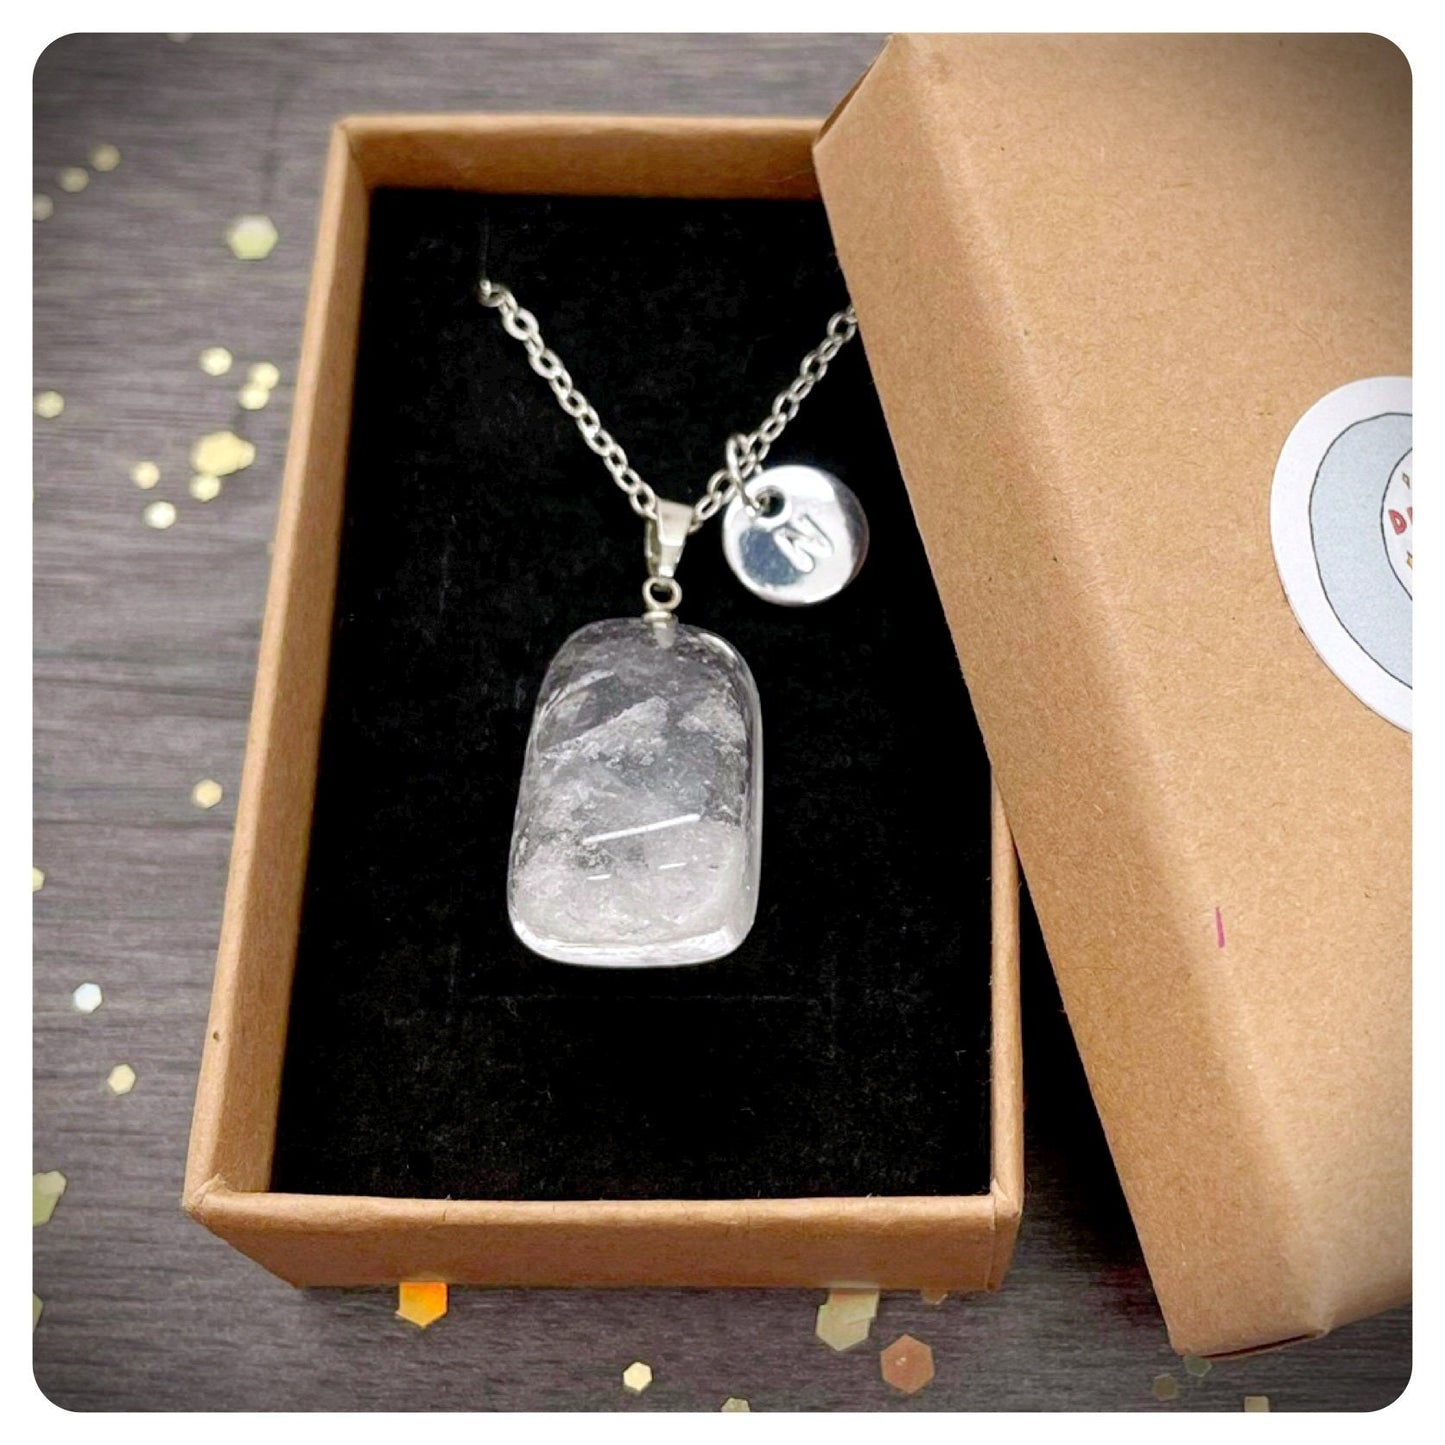 Clear Quartz Crystal Initial Necklace, Natural Gemstone Jewellery